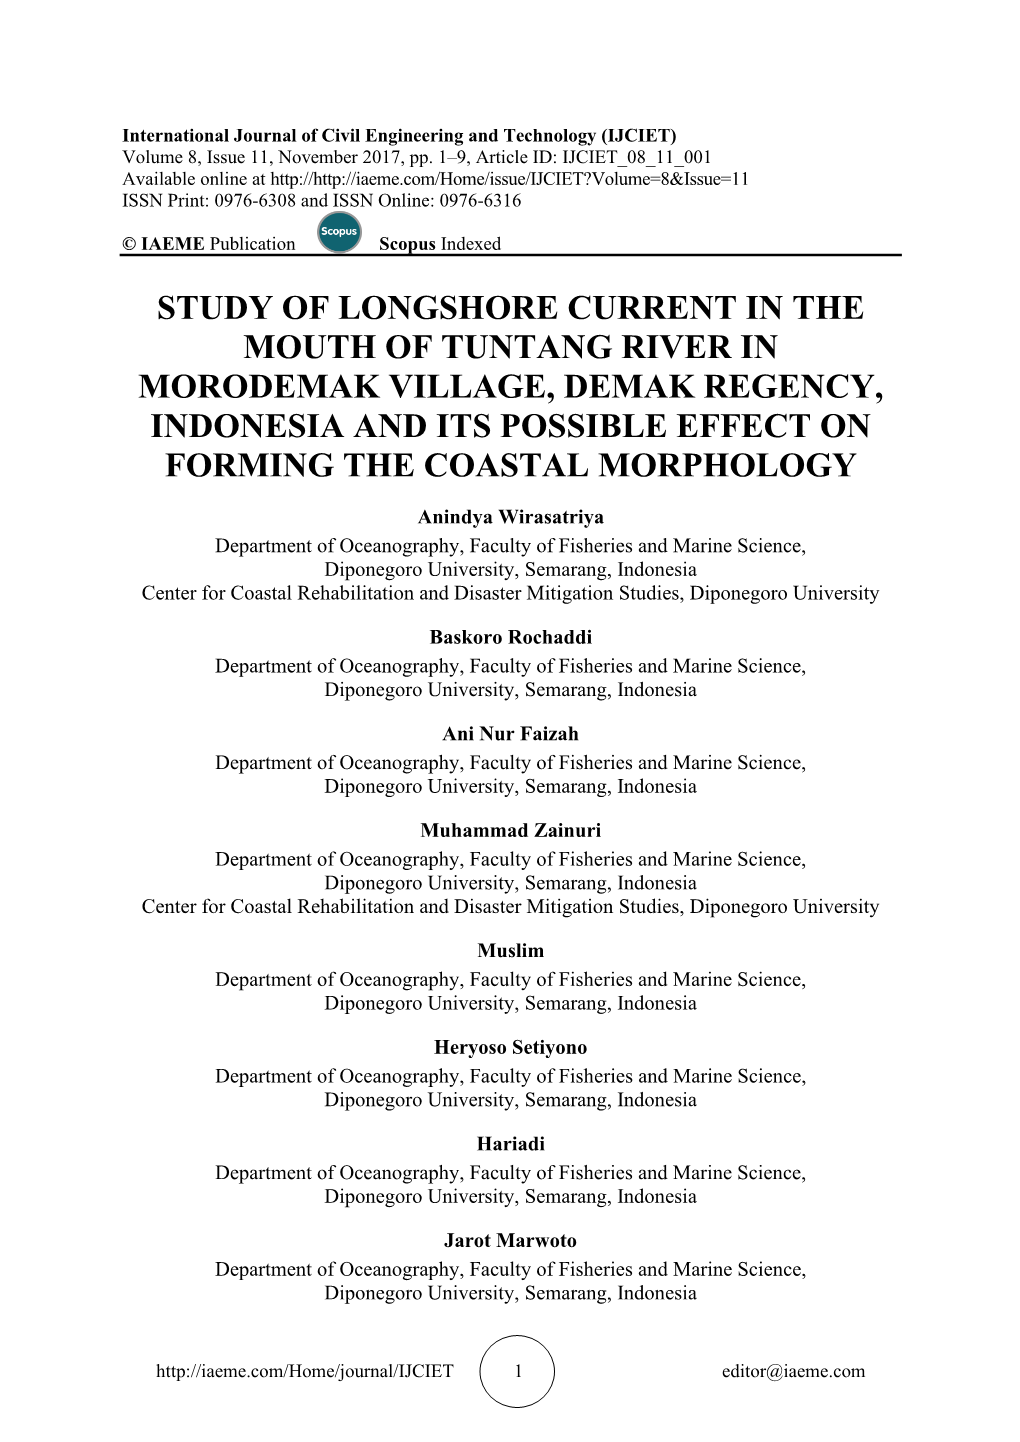 Study of Longshore Current in the Mouth of Tuntang River in Morodemak Village, Demak Regency, Indonesia and Its Possible Effect on Forming the Coastal Morphology